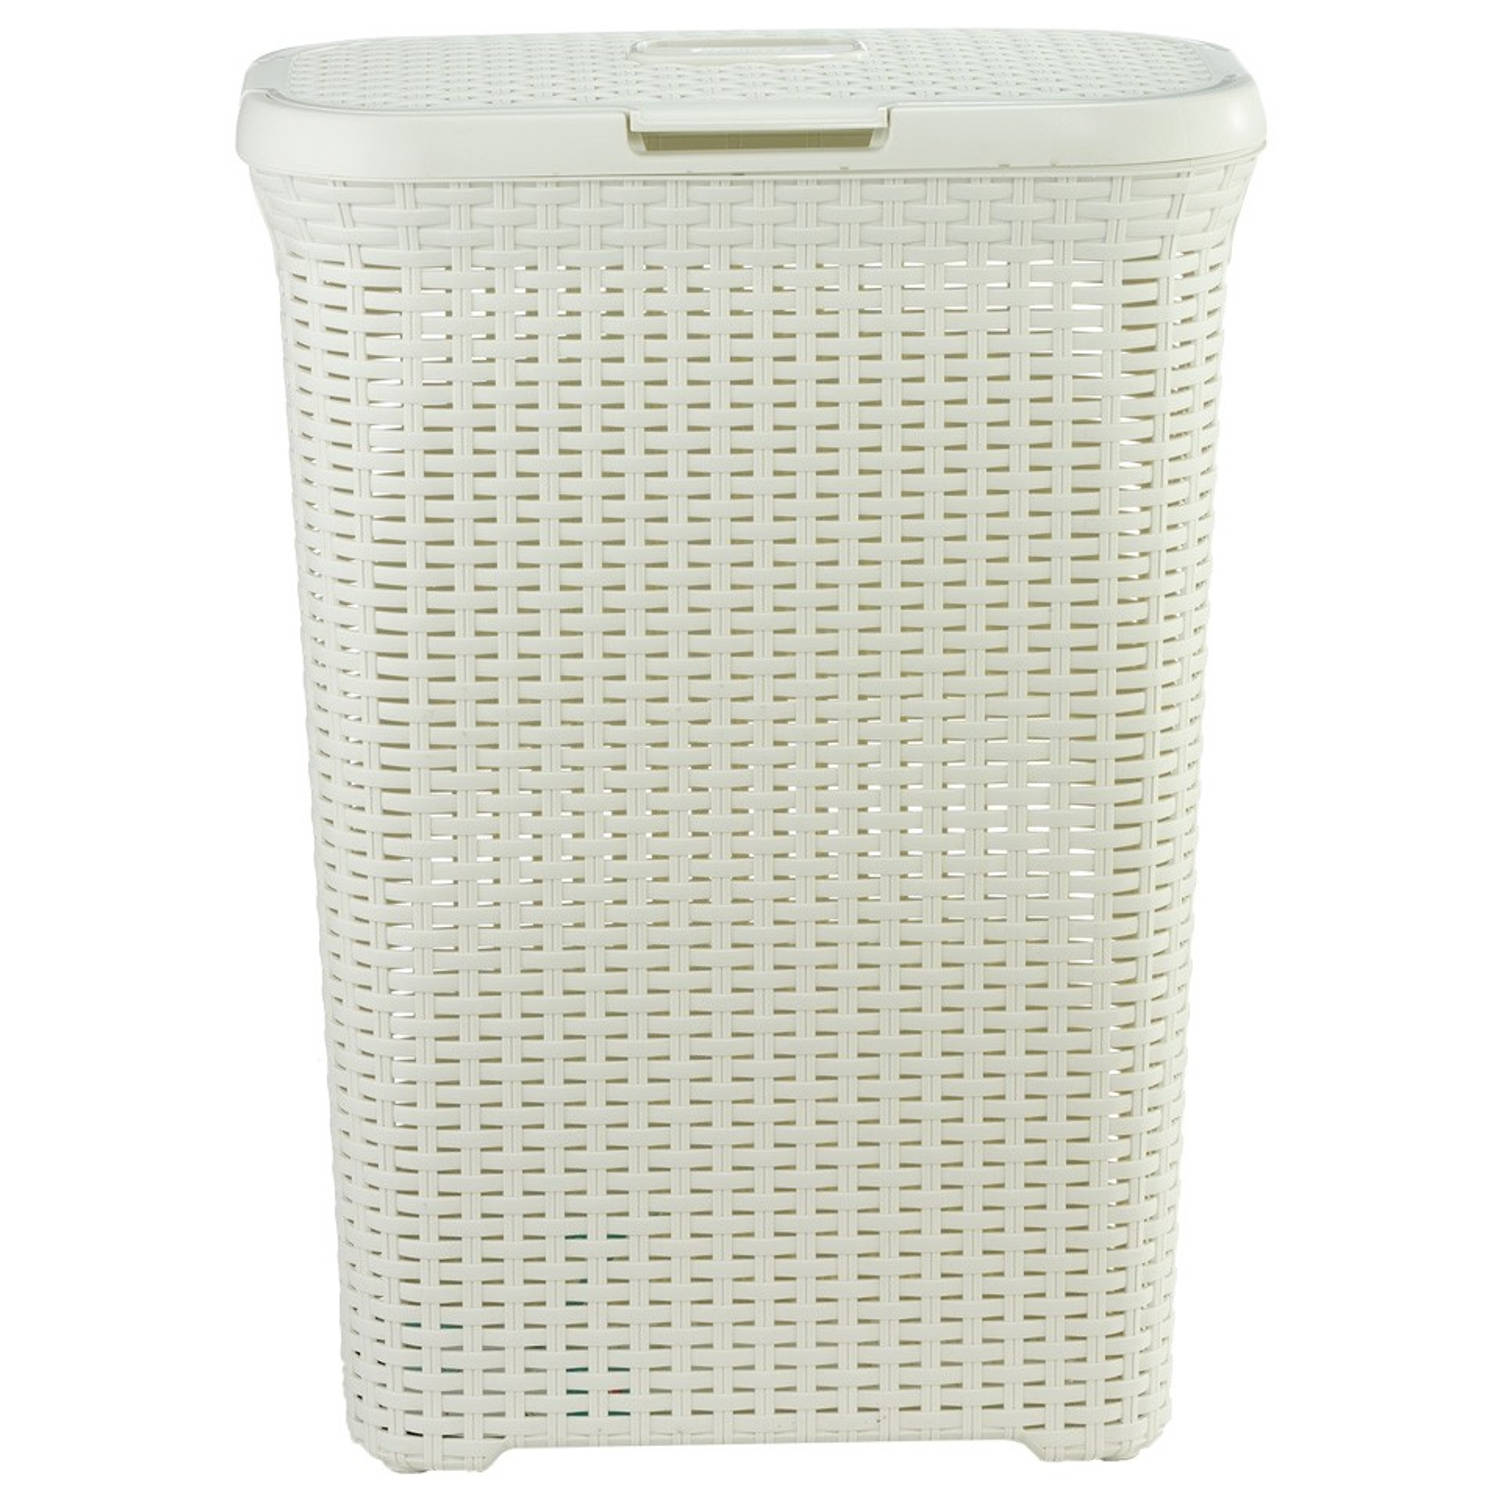 Curver style natural wasbox 40 liter wit